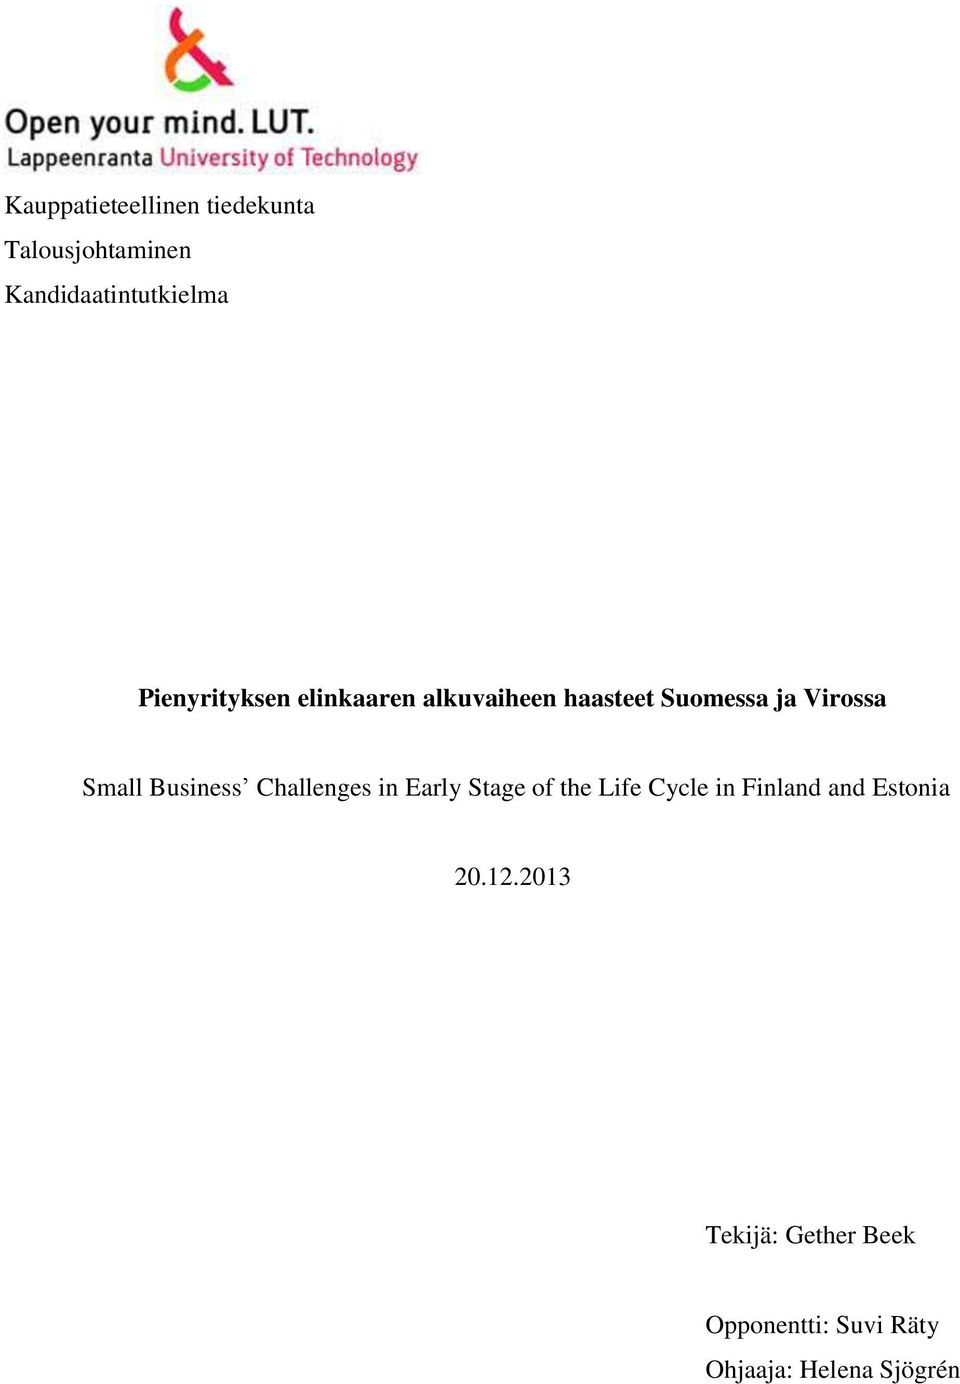 Business Challenges in Early Stage of the Life Cycle in Finland and